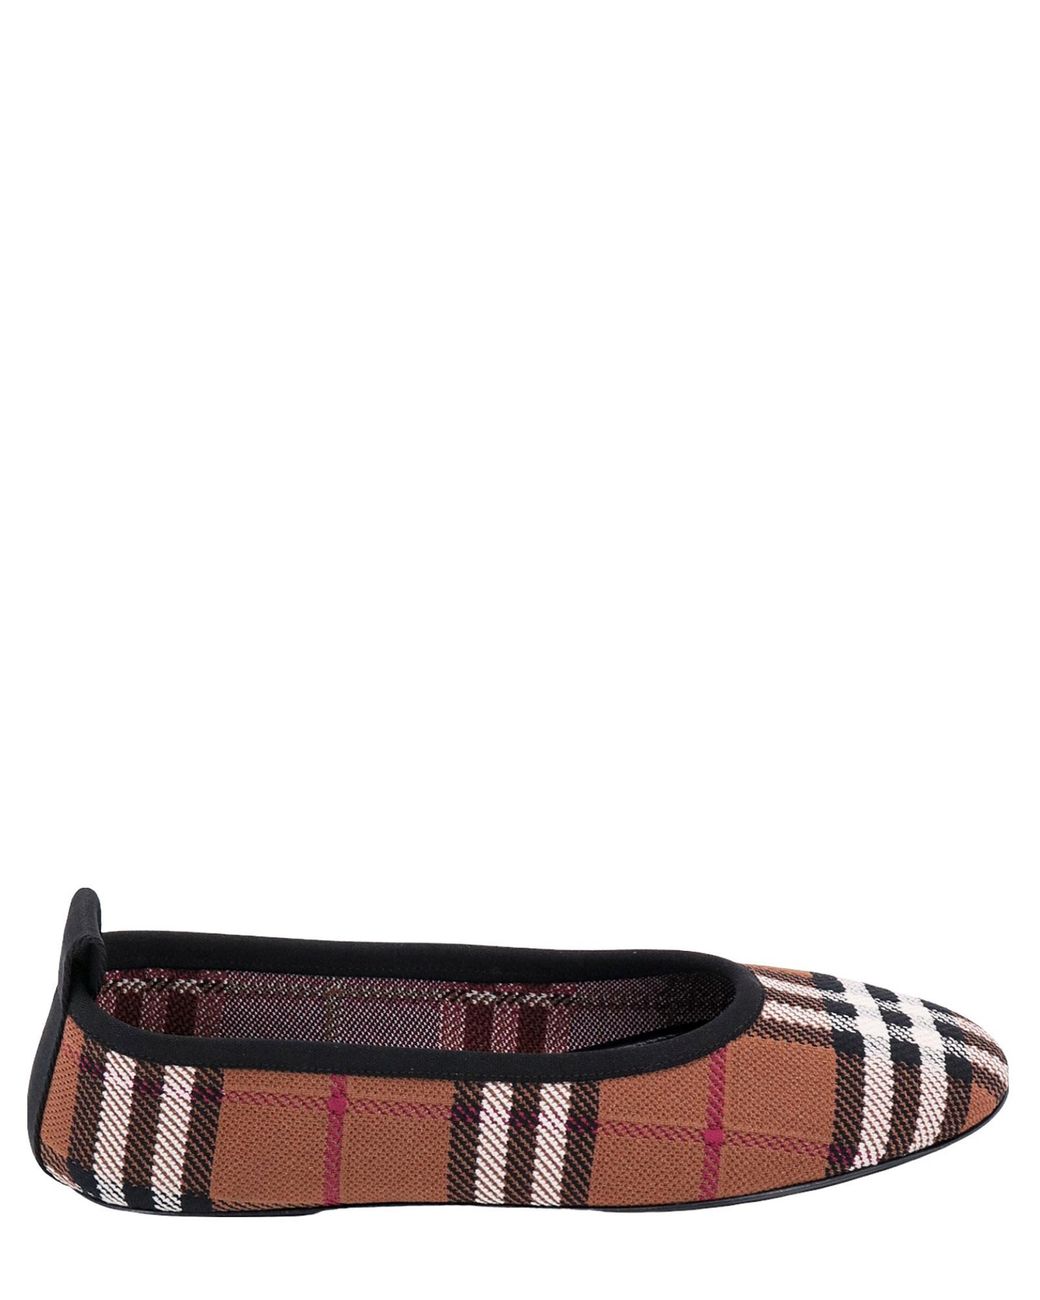 Burberry Ballet Flats in Brown | Lyst